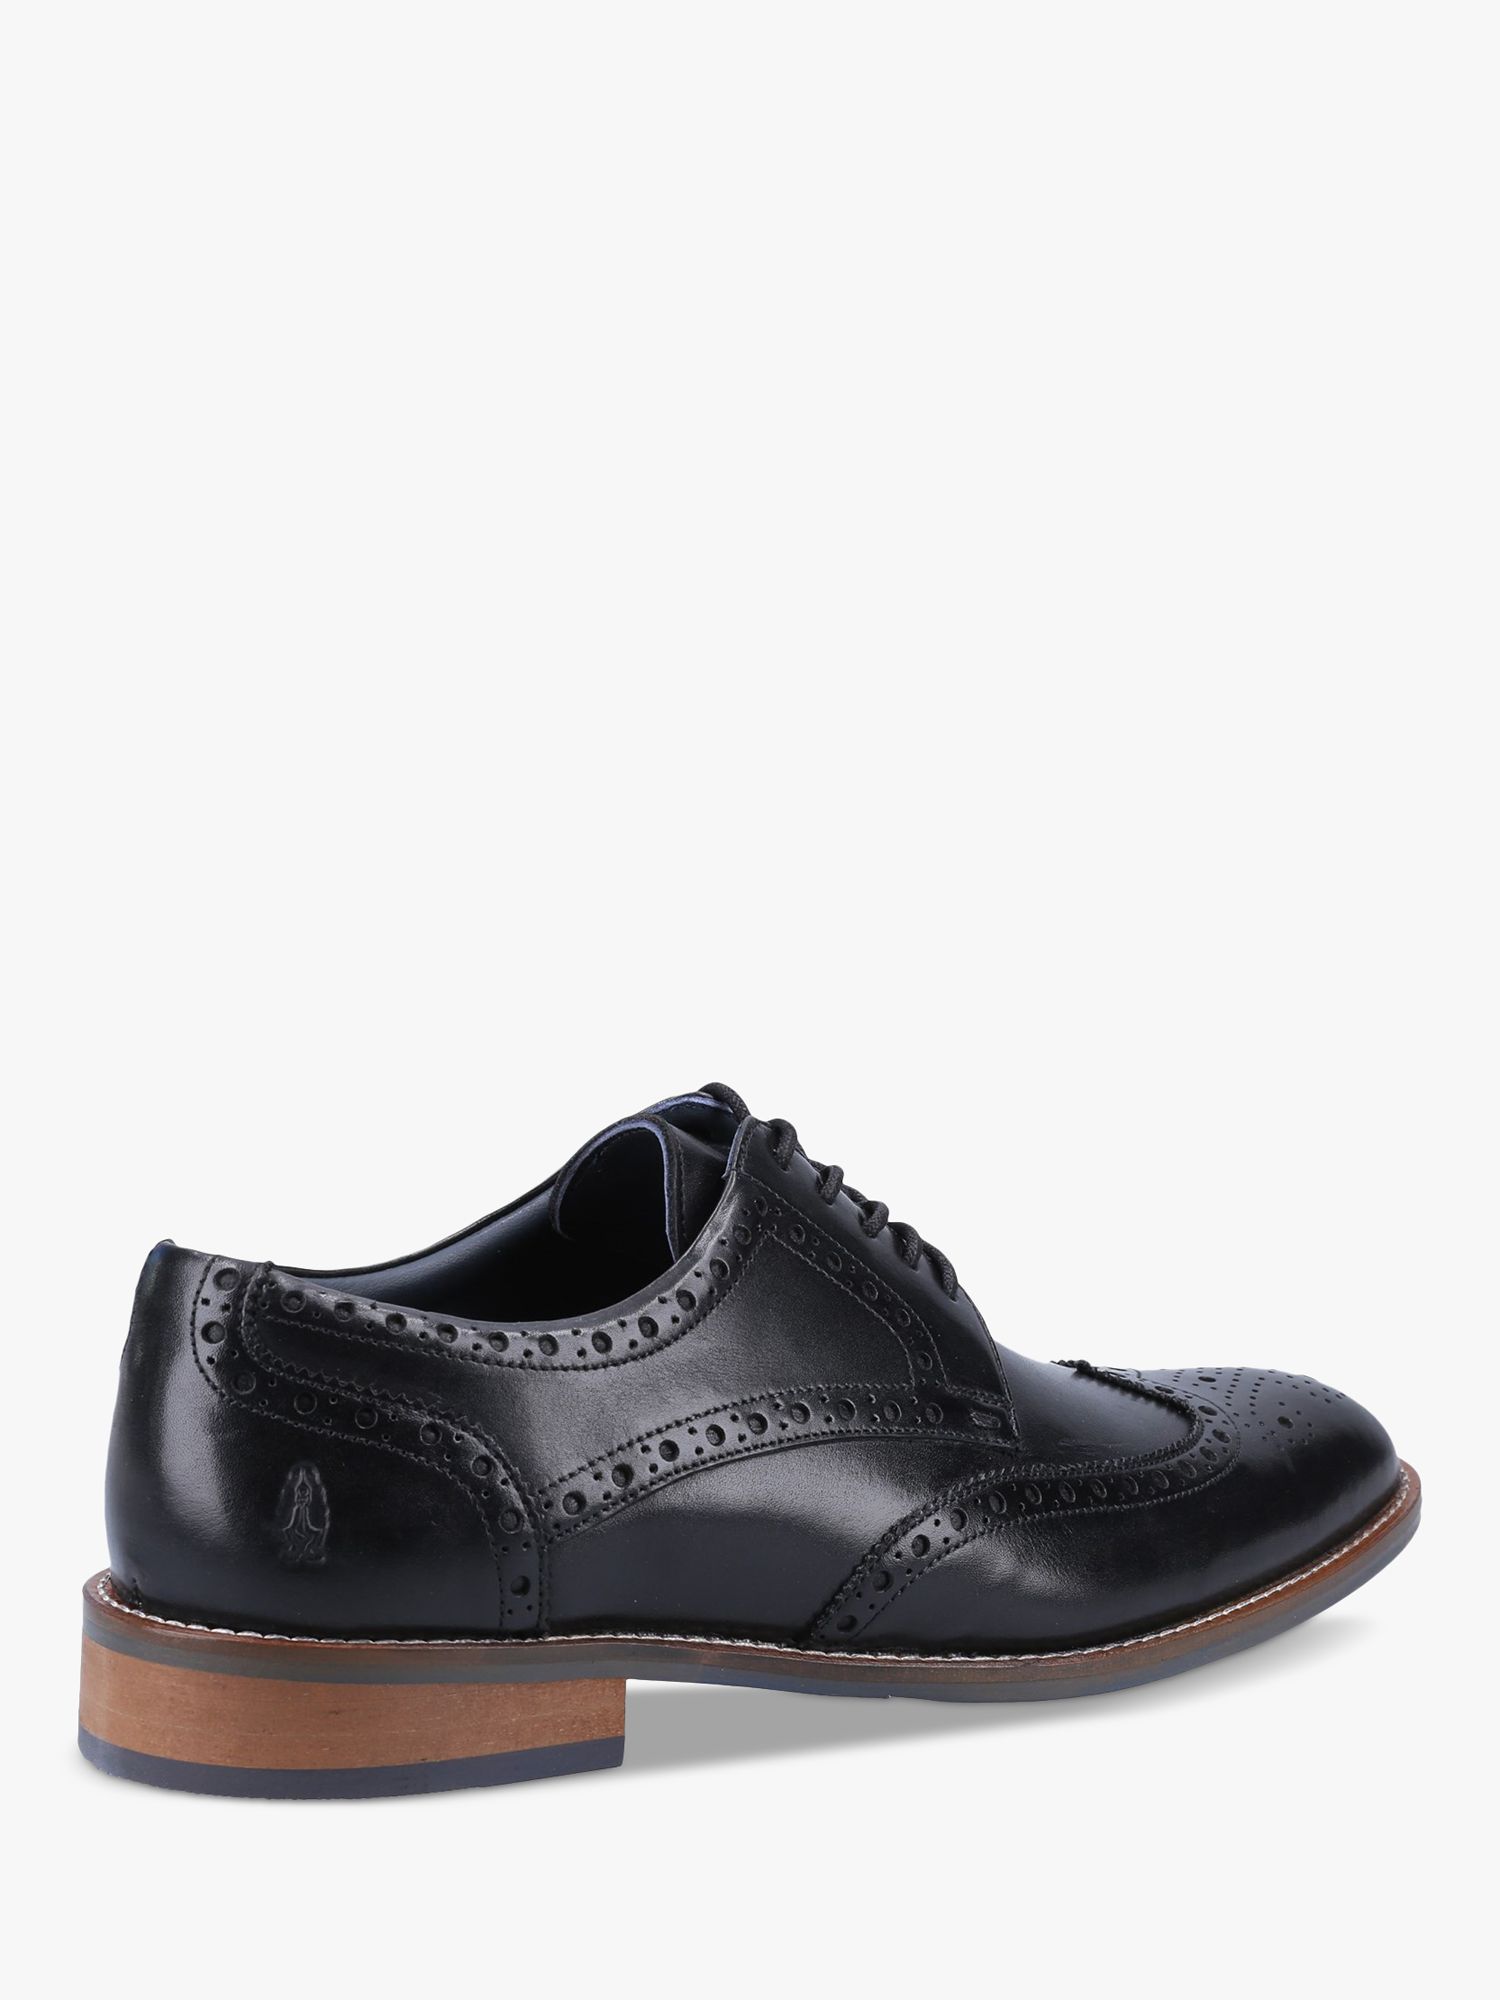 Hush Puppies Dustin Leather Brogues, Black, 9